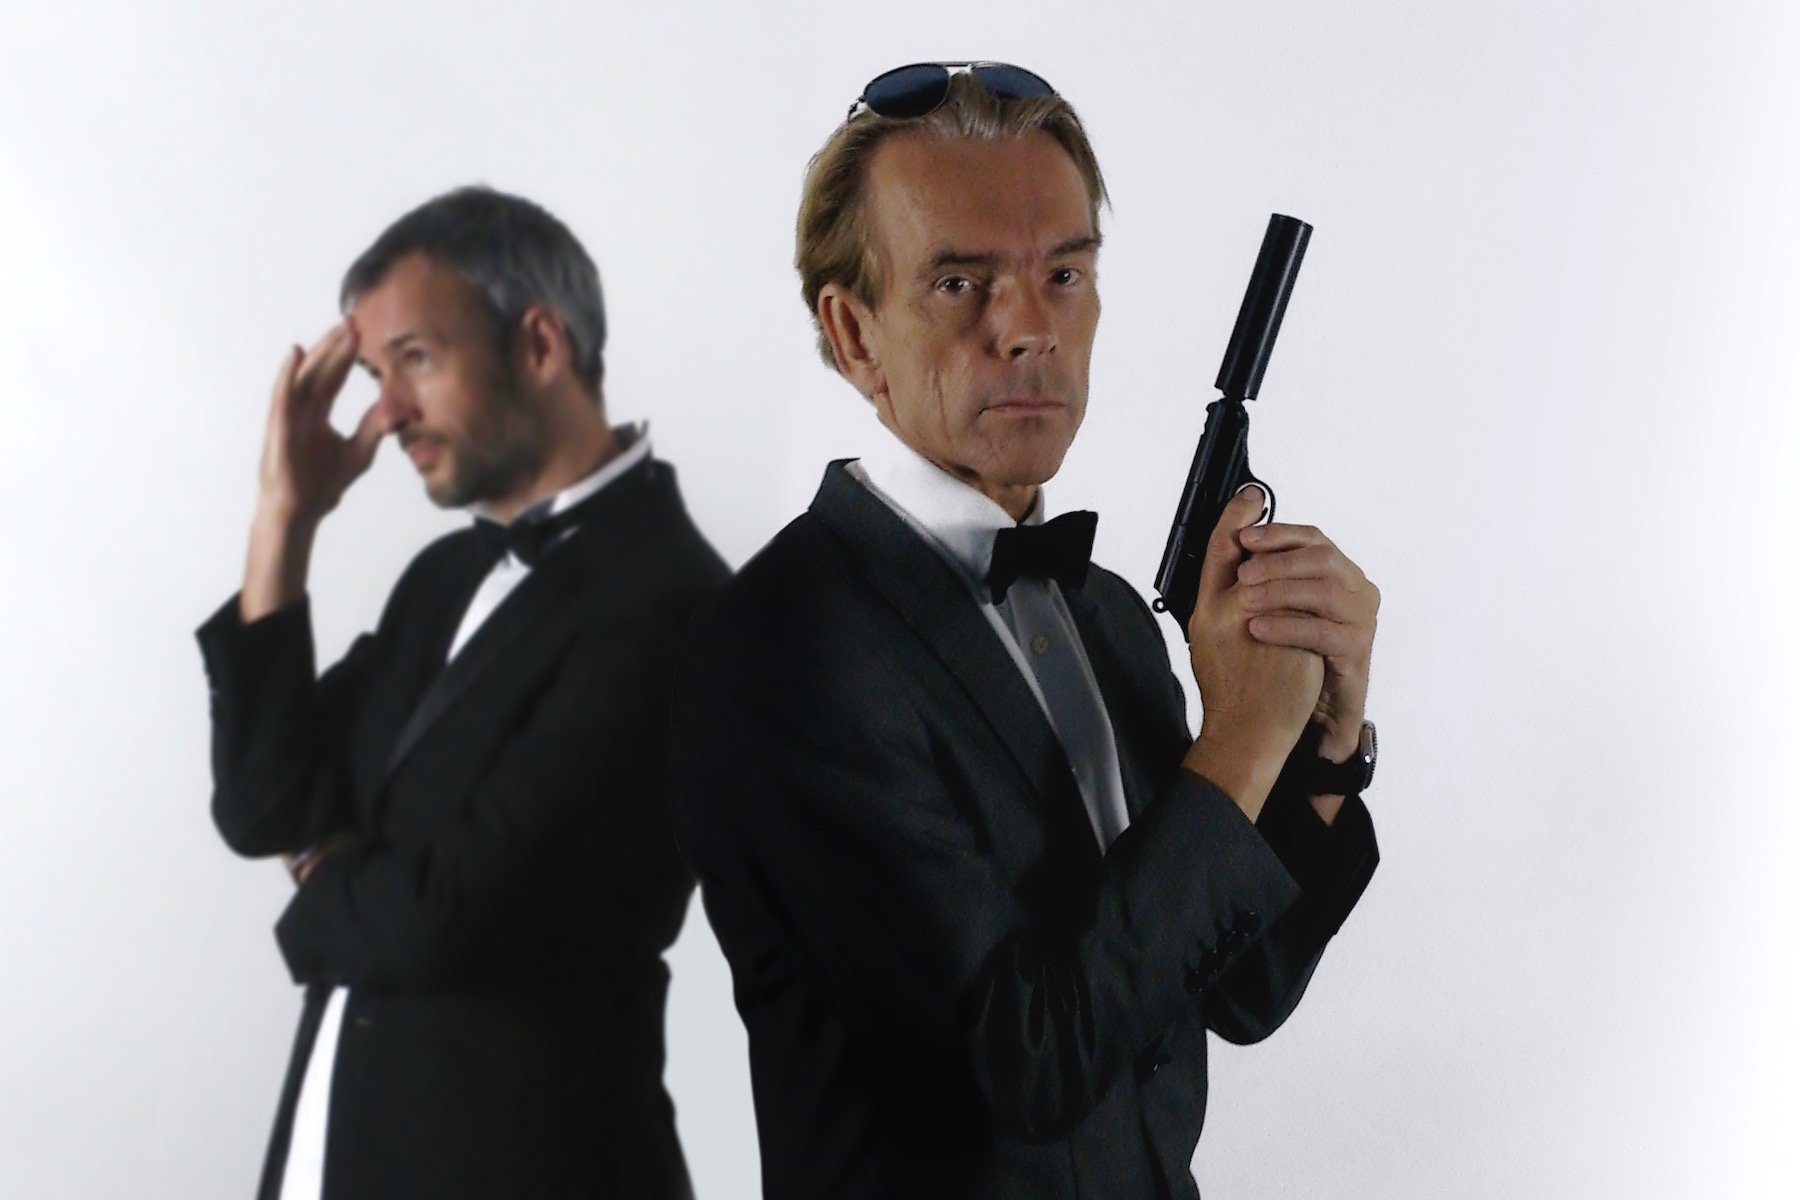 THE OTHER FELLOW - BTS - London_s James Hart (formerly James Bond) and Sweden_s Gunnar Bond James Schäfer in opposing poses